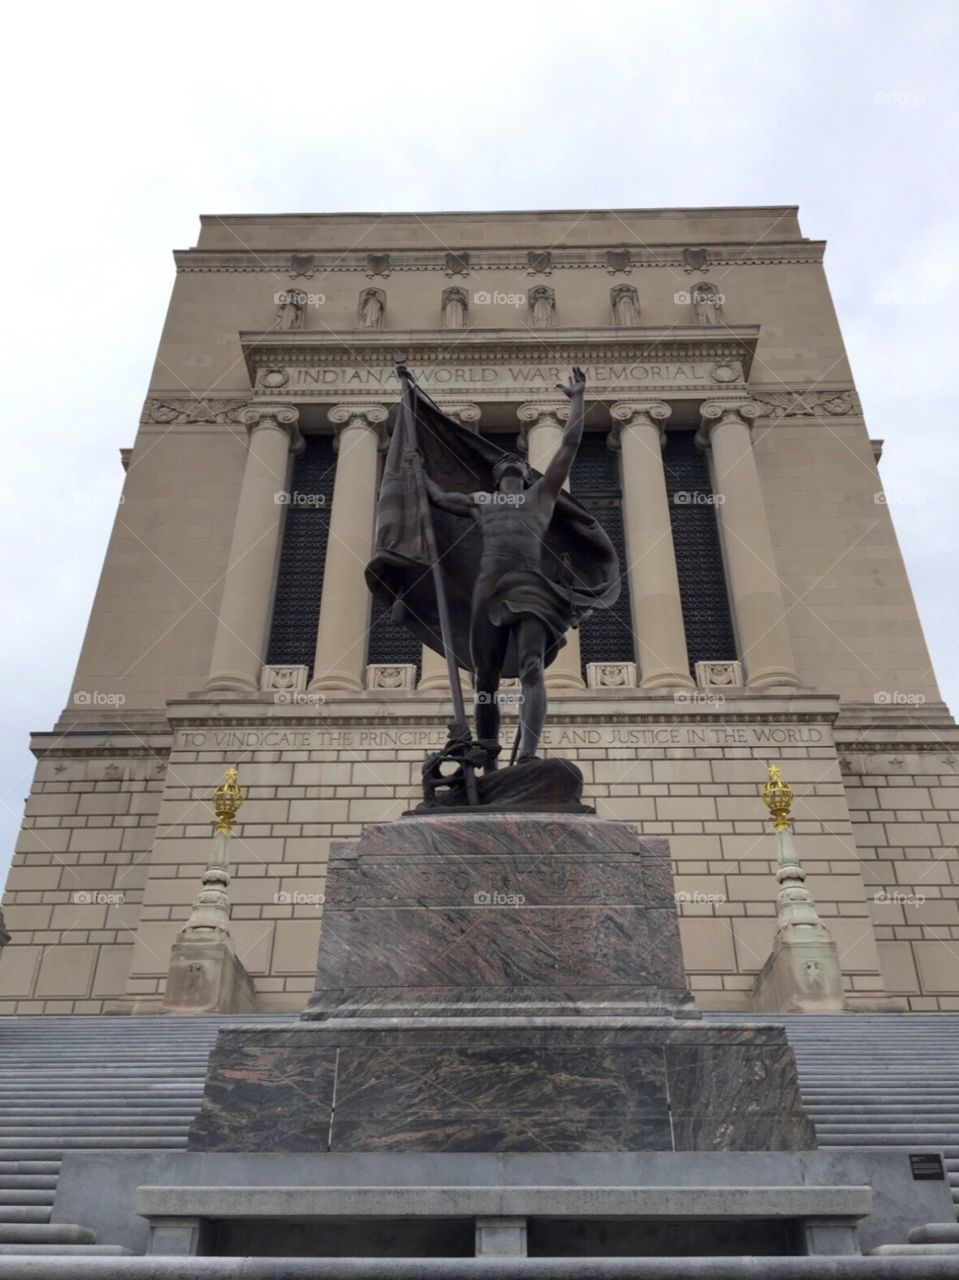 Indianapolis , Indiana World War Memorial .  To vindicate the principles of peace and justice in the world.